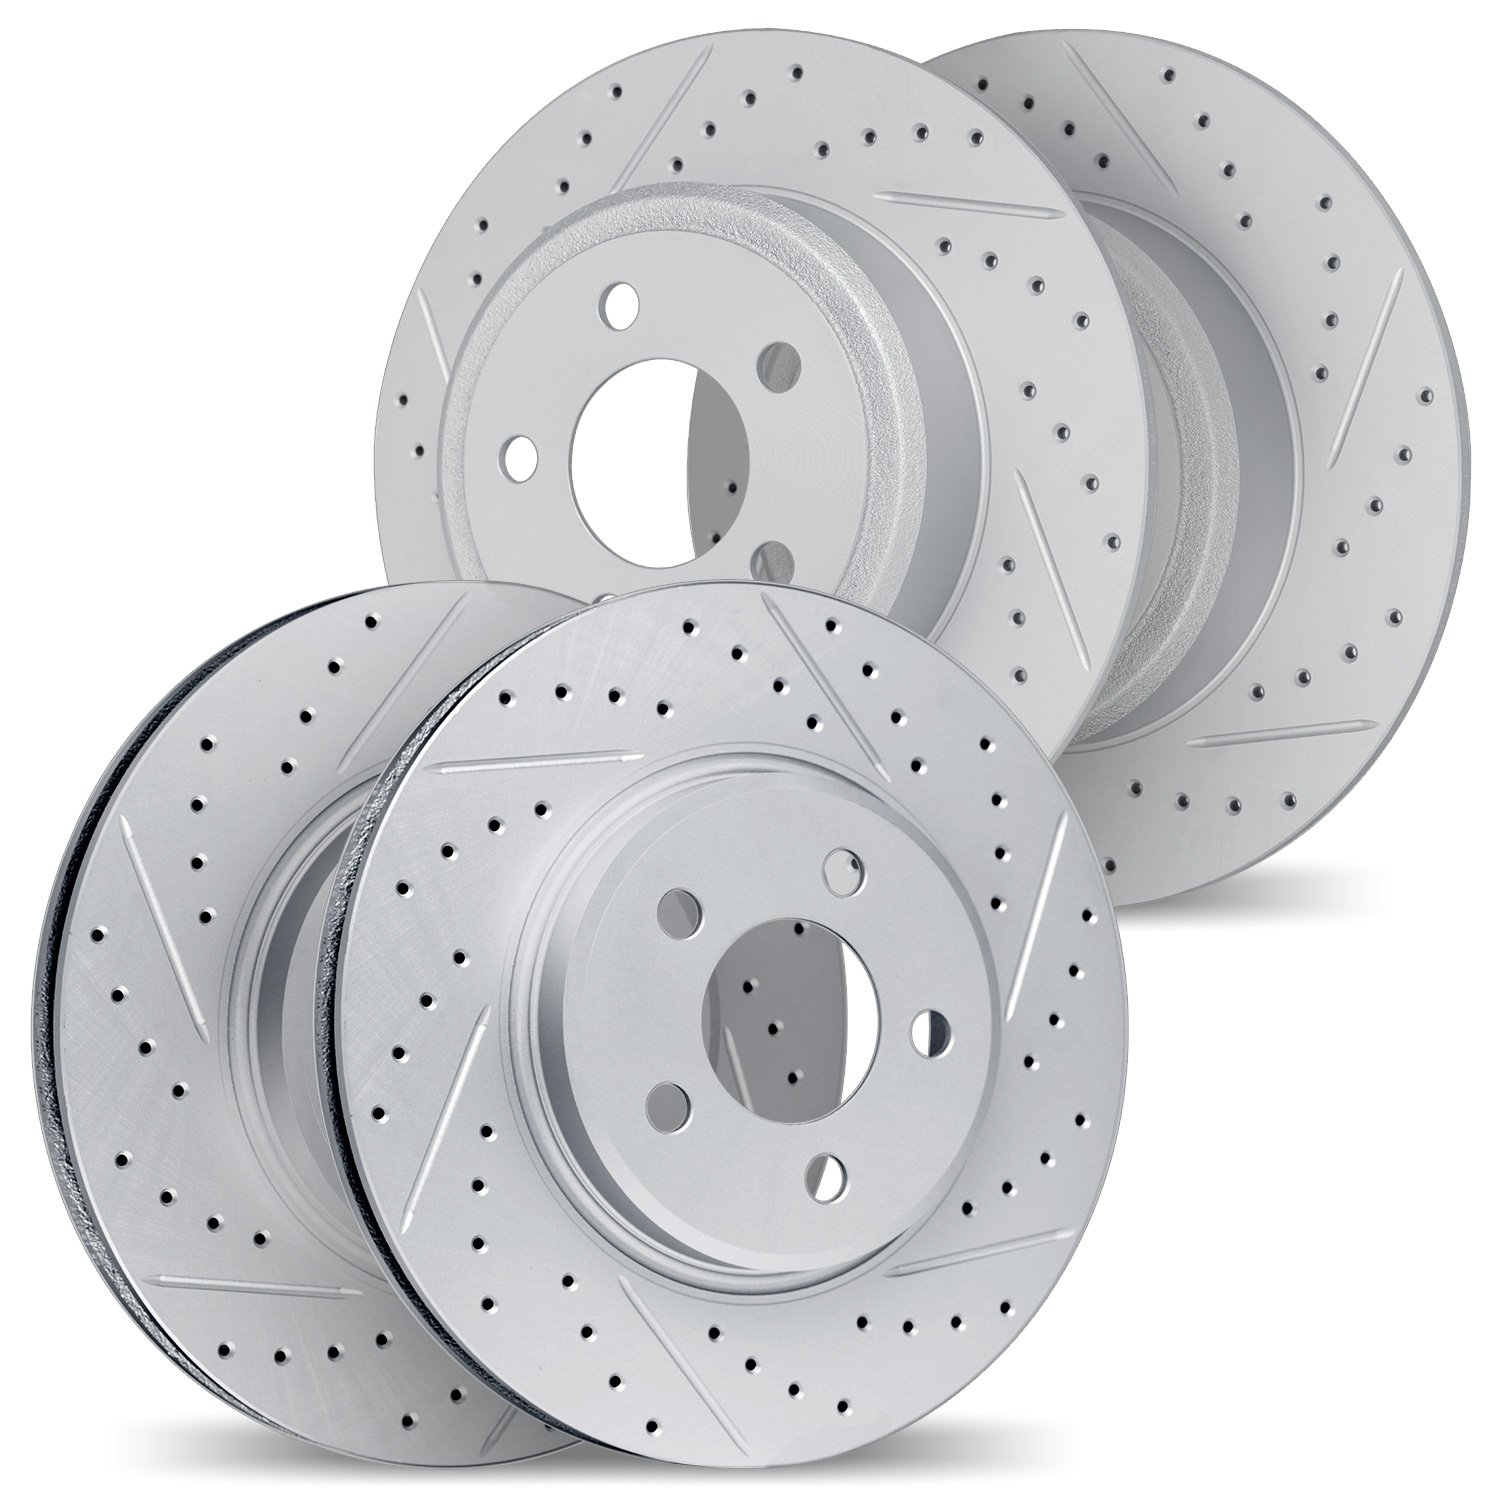 2004-59059 Geoperformance Drilled/Slotted Brake Rotors, 2011-2015 Acura/Honda, Position: Front and Rear